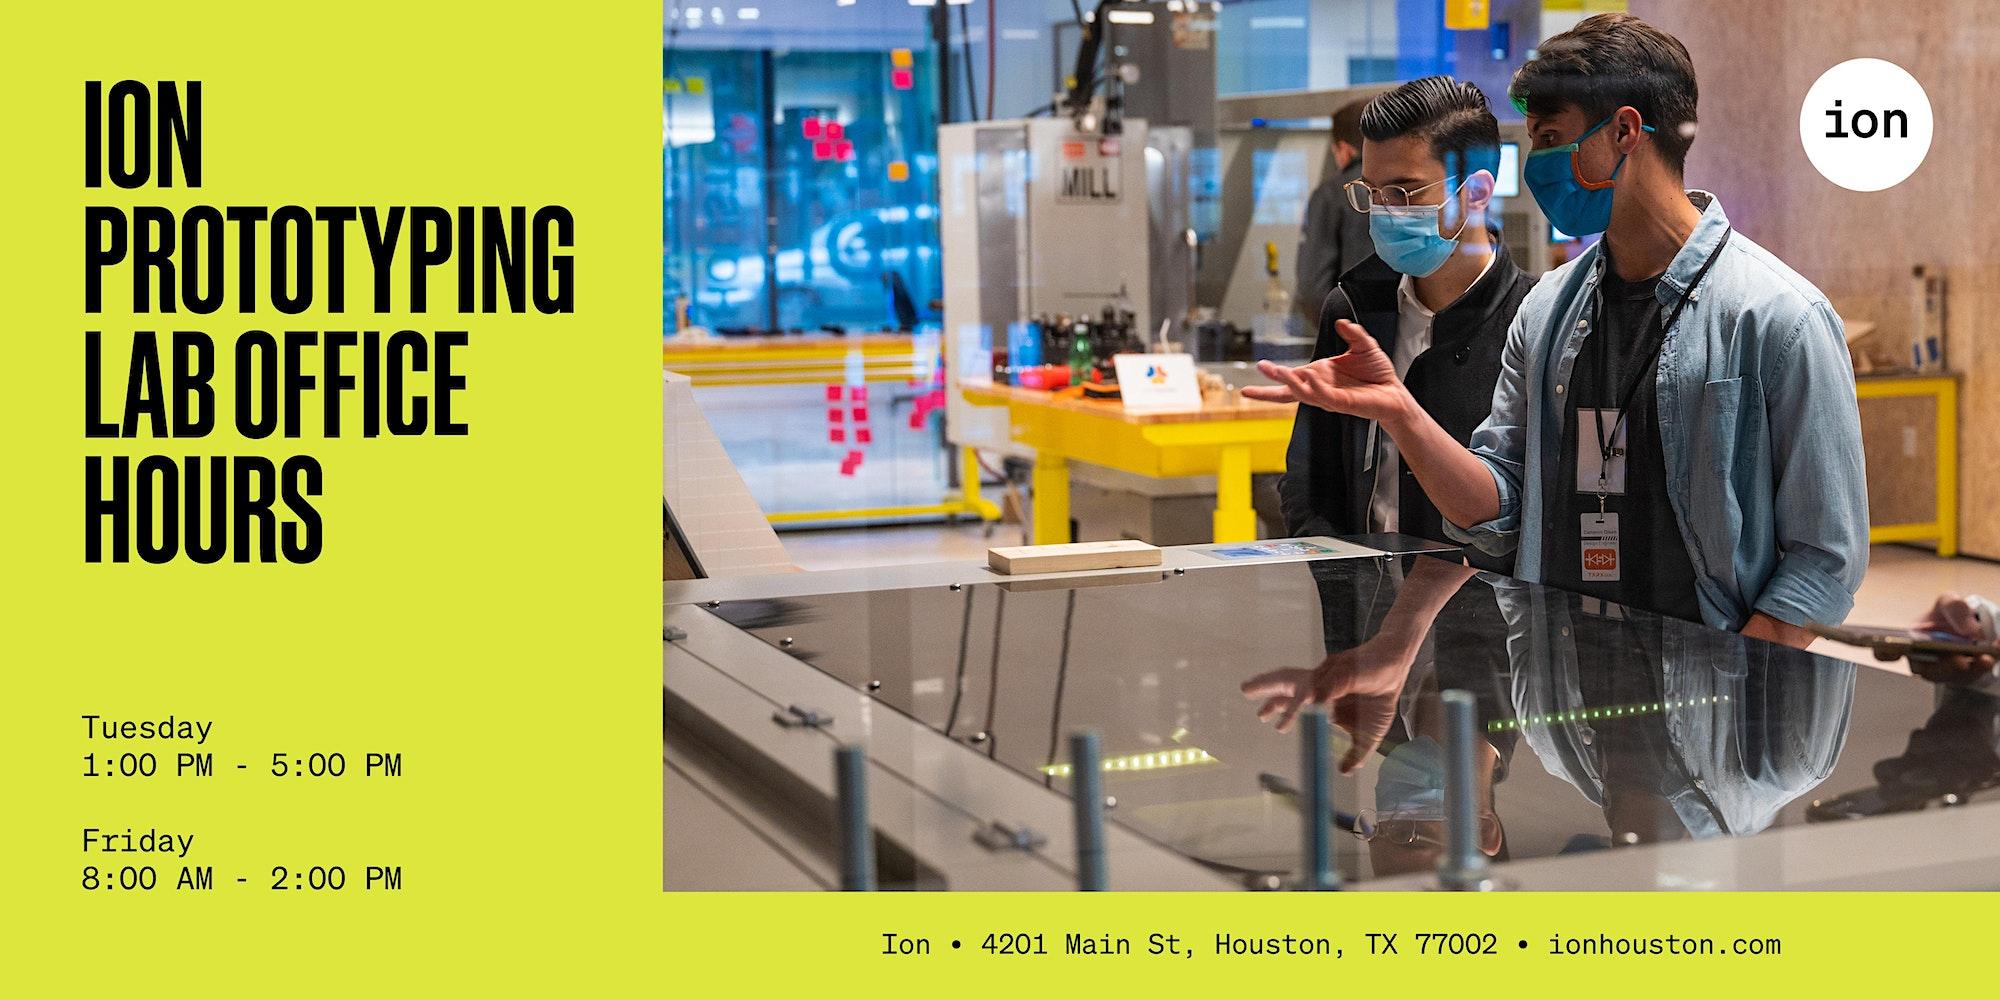 Ion Prototyping Lab Office Hours – Events in Houston